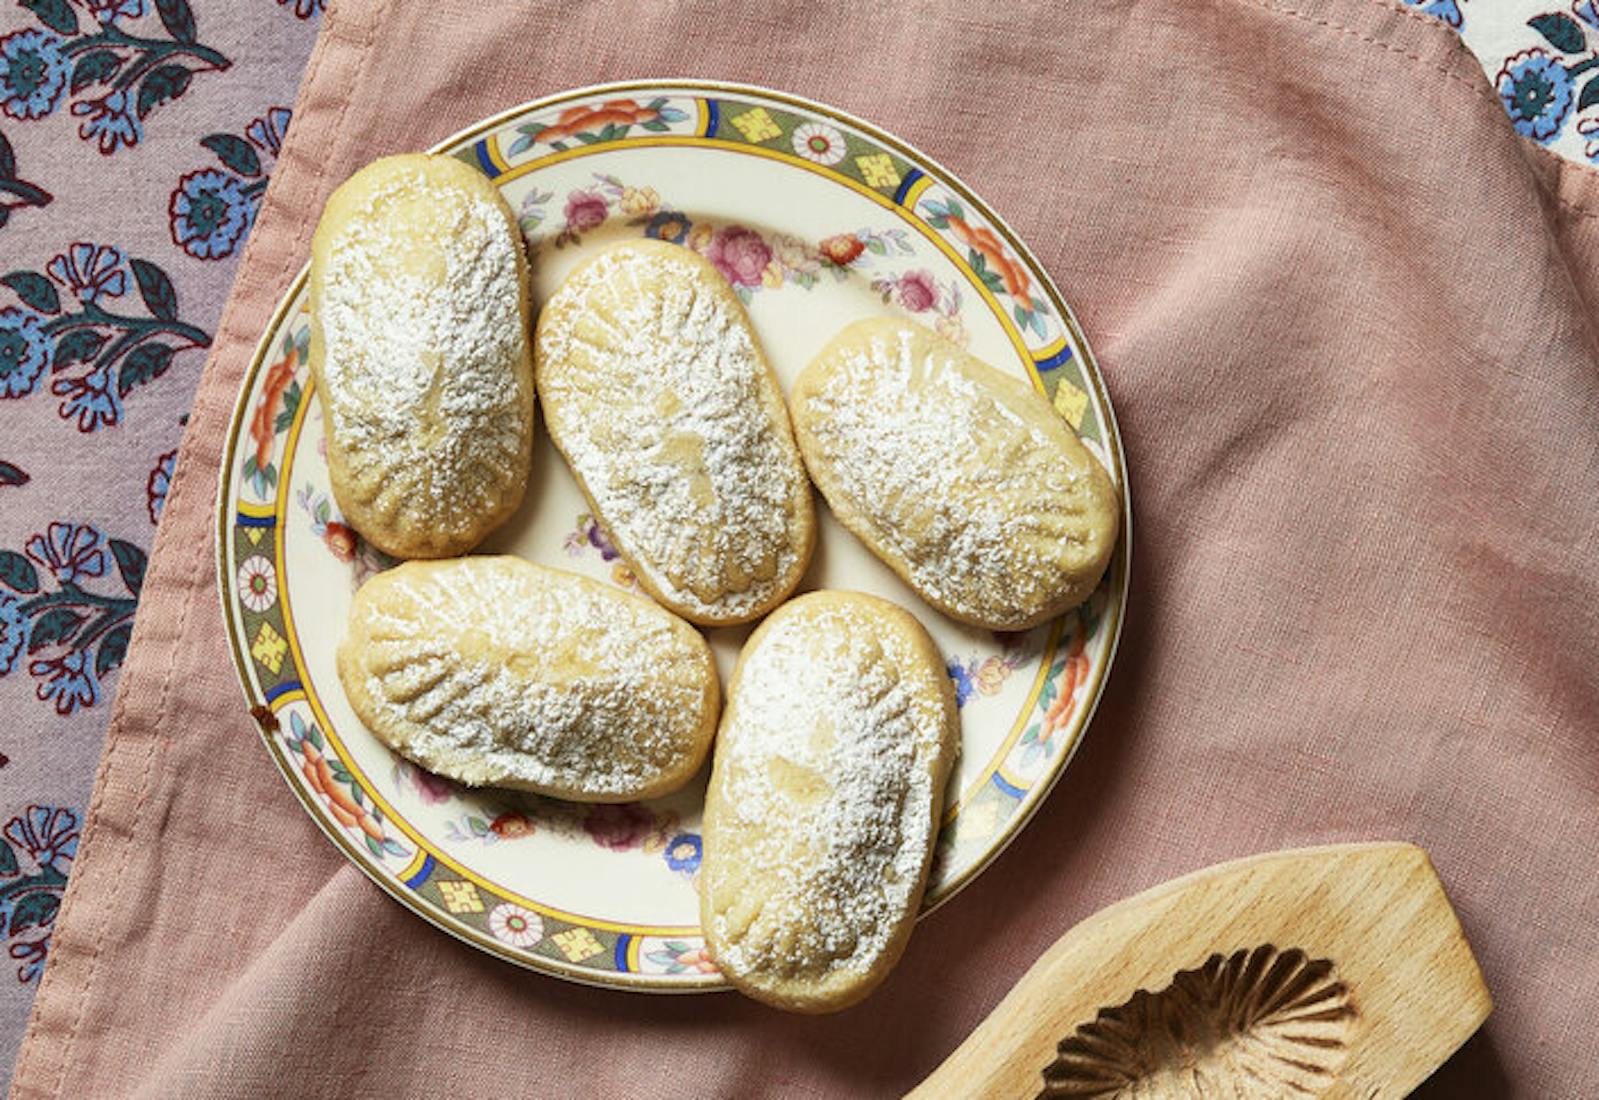 7. Menenas (Shortbread Filled With Dates and Walnuts)